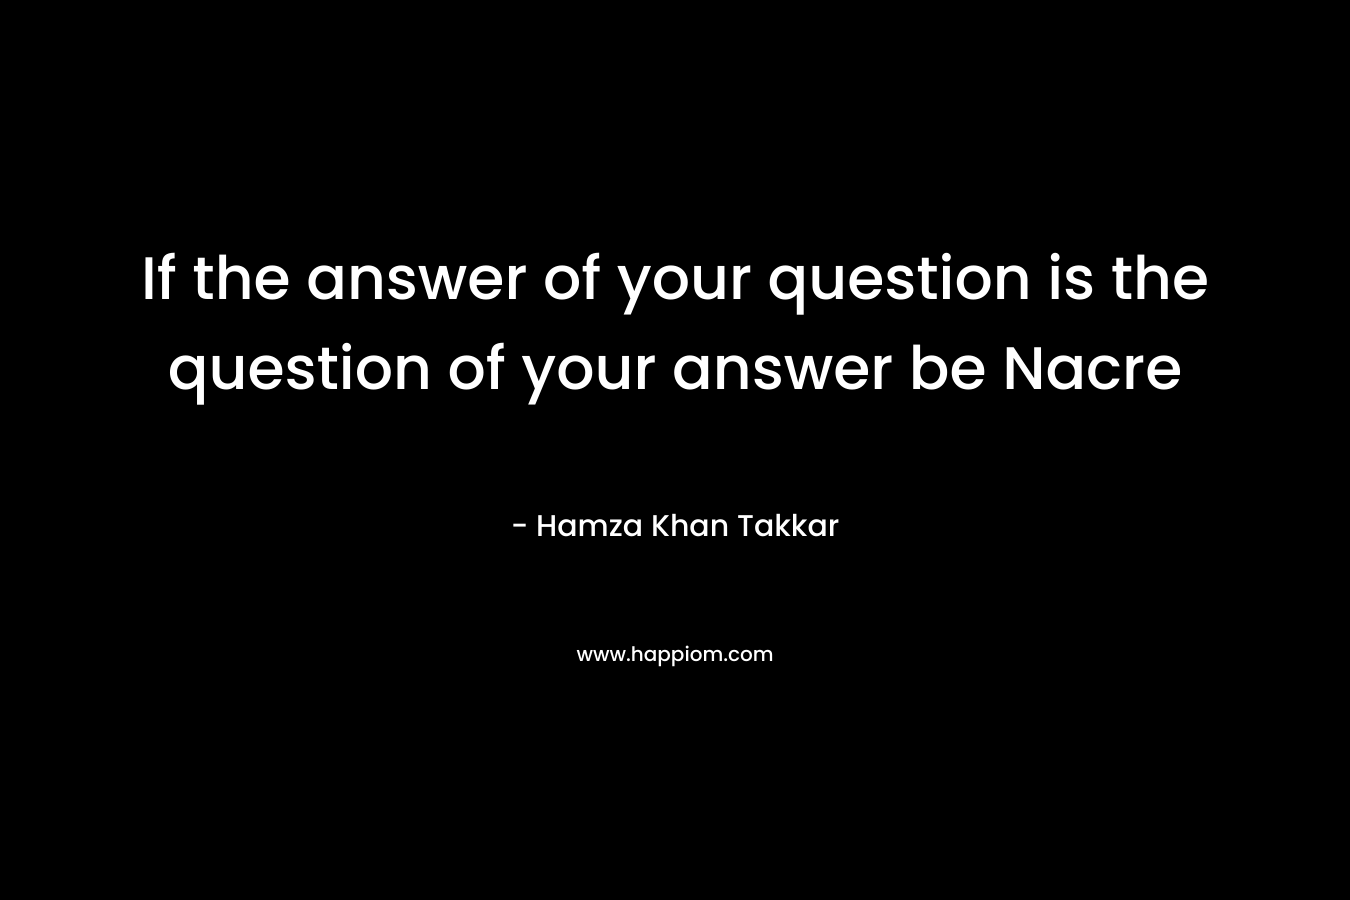 If the answer of your question is the question of your answer be Nacre – Hamza Khan Takkar